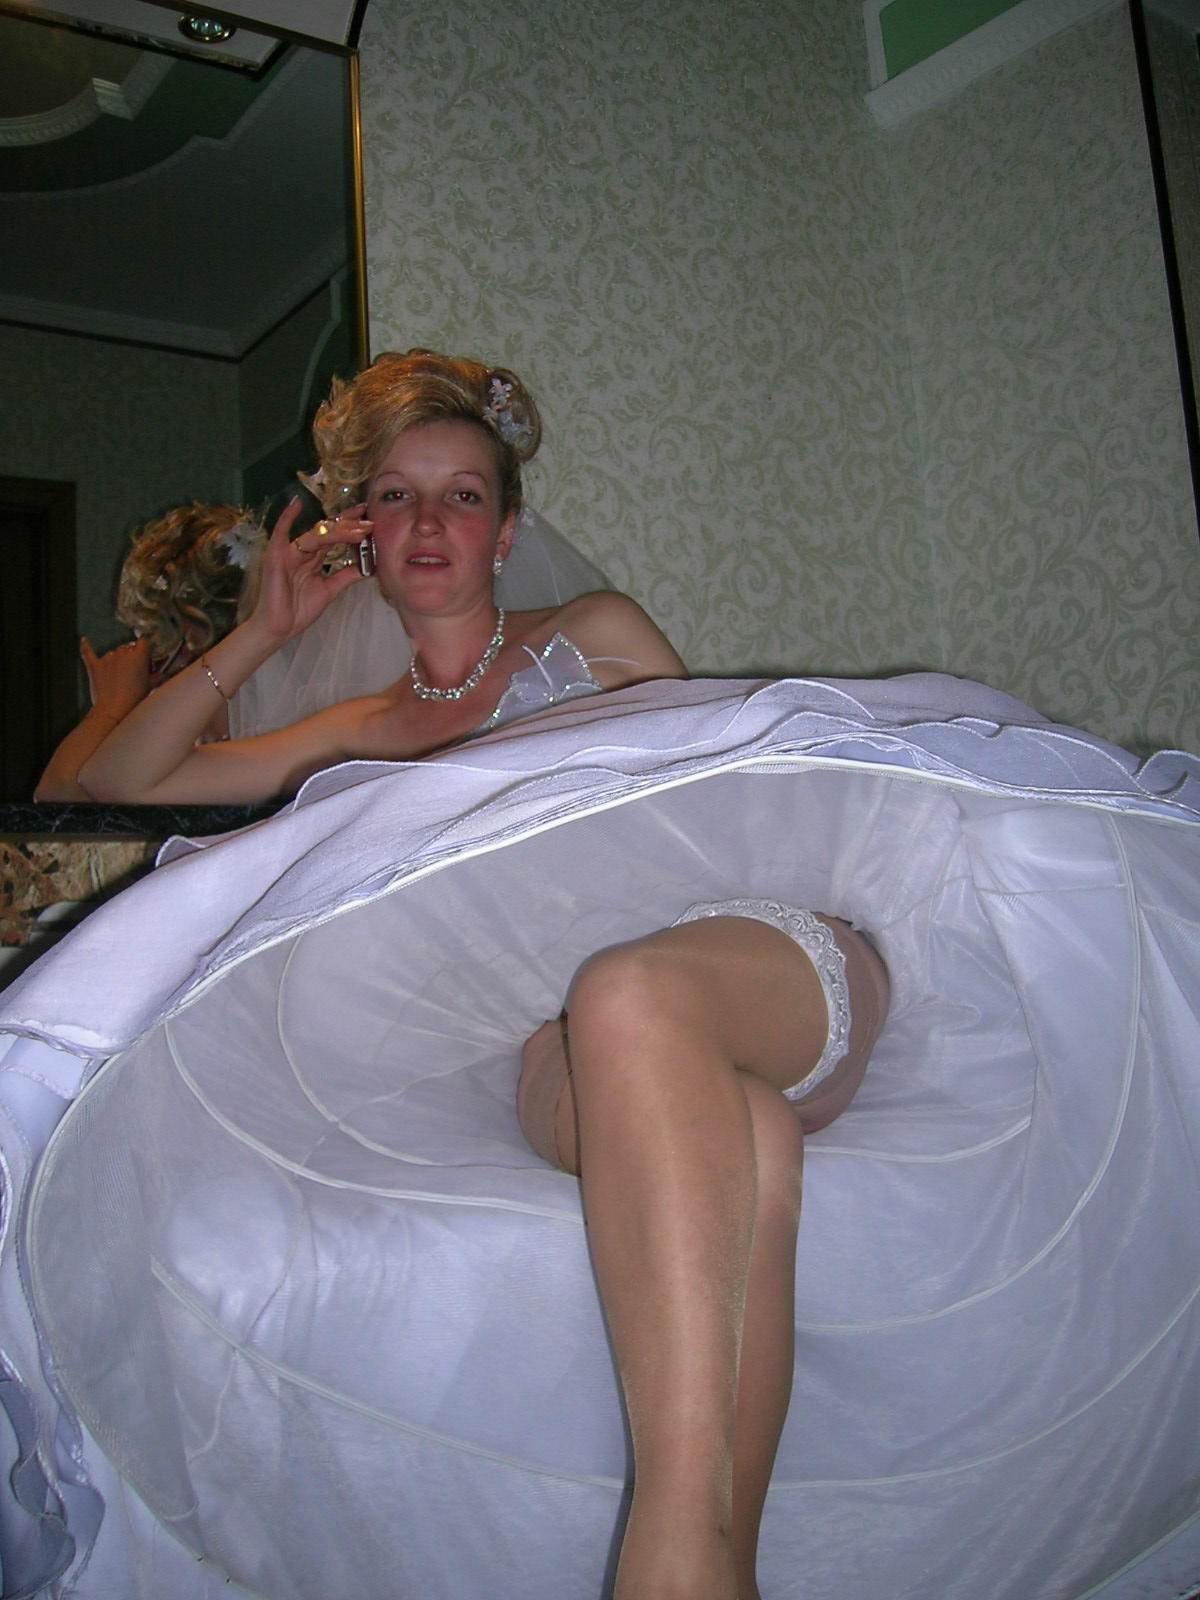 Real Amateur Public Candid Upskirt Picture Sex Gallery Collection Of Bride Dressed In Wedding